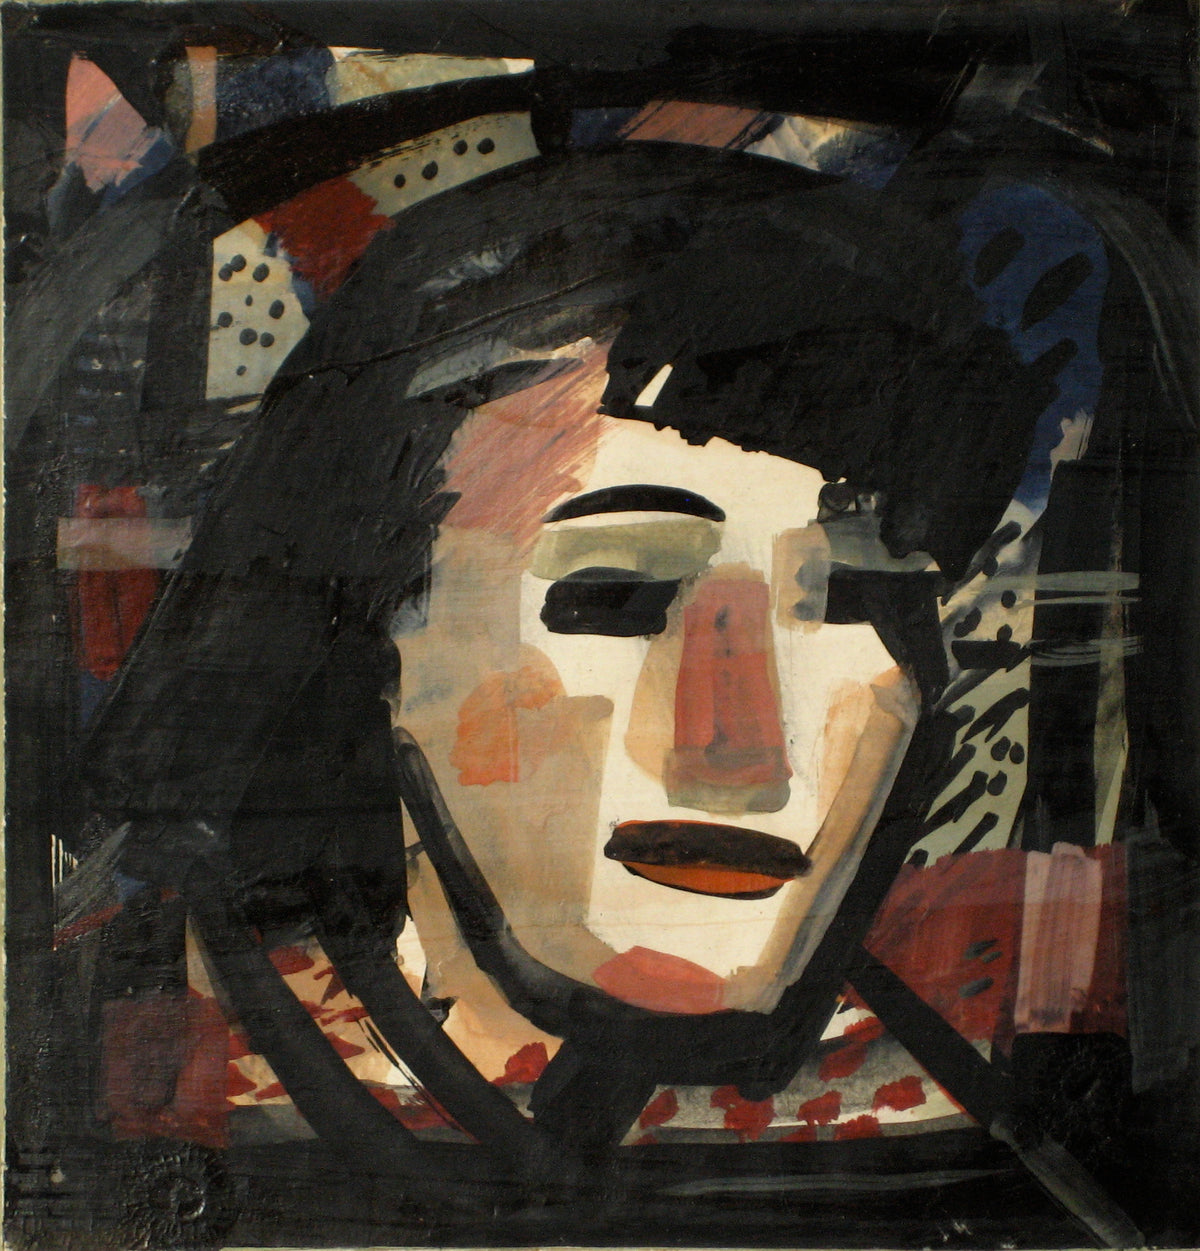 Abstracted Portrait Of A Woman&lt;br&gt;1930-60s, Tempera Paint on Paper&lt;br&gt;&lt;br&gt;#13187